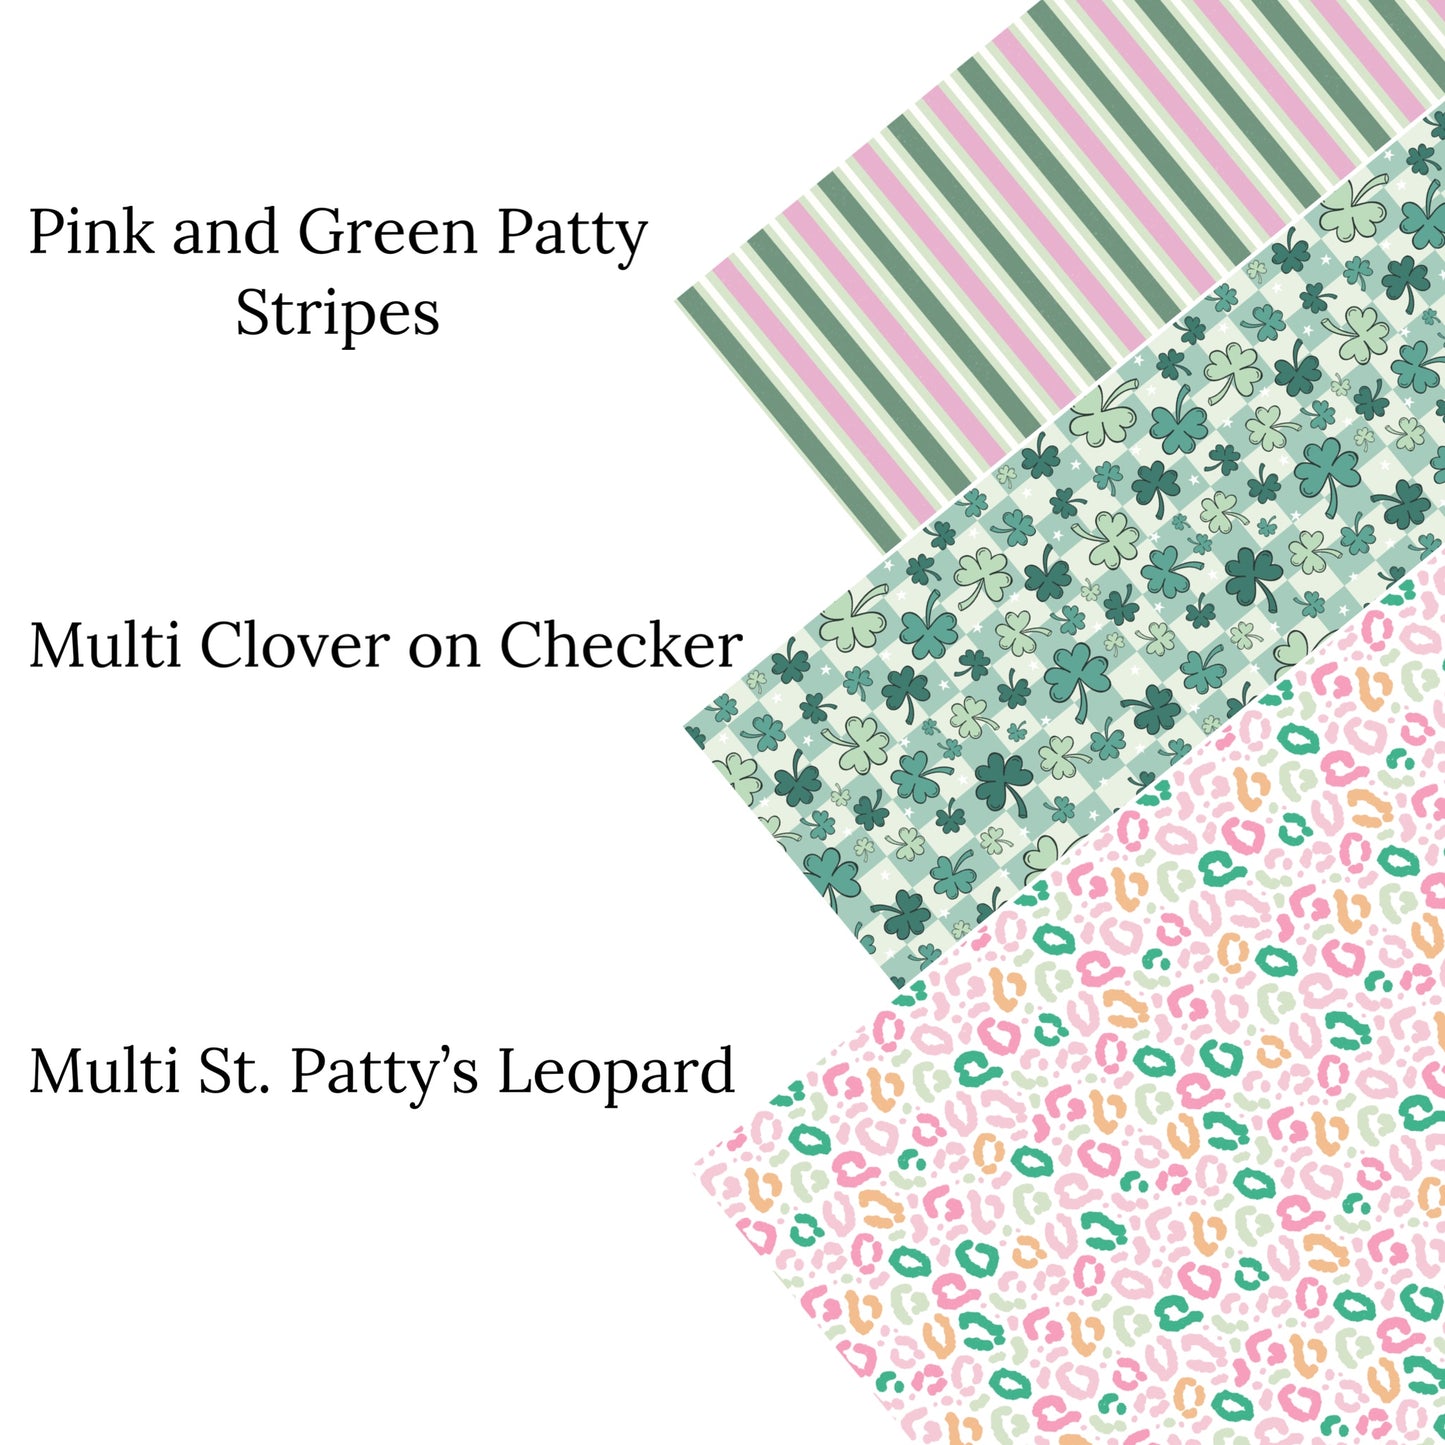 Pink and Green Patty Stripes Faux Leather Sheets